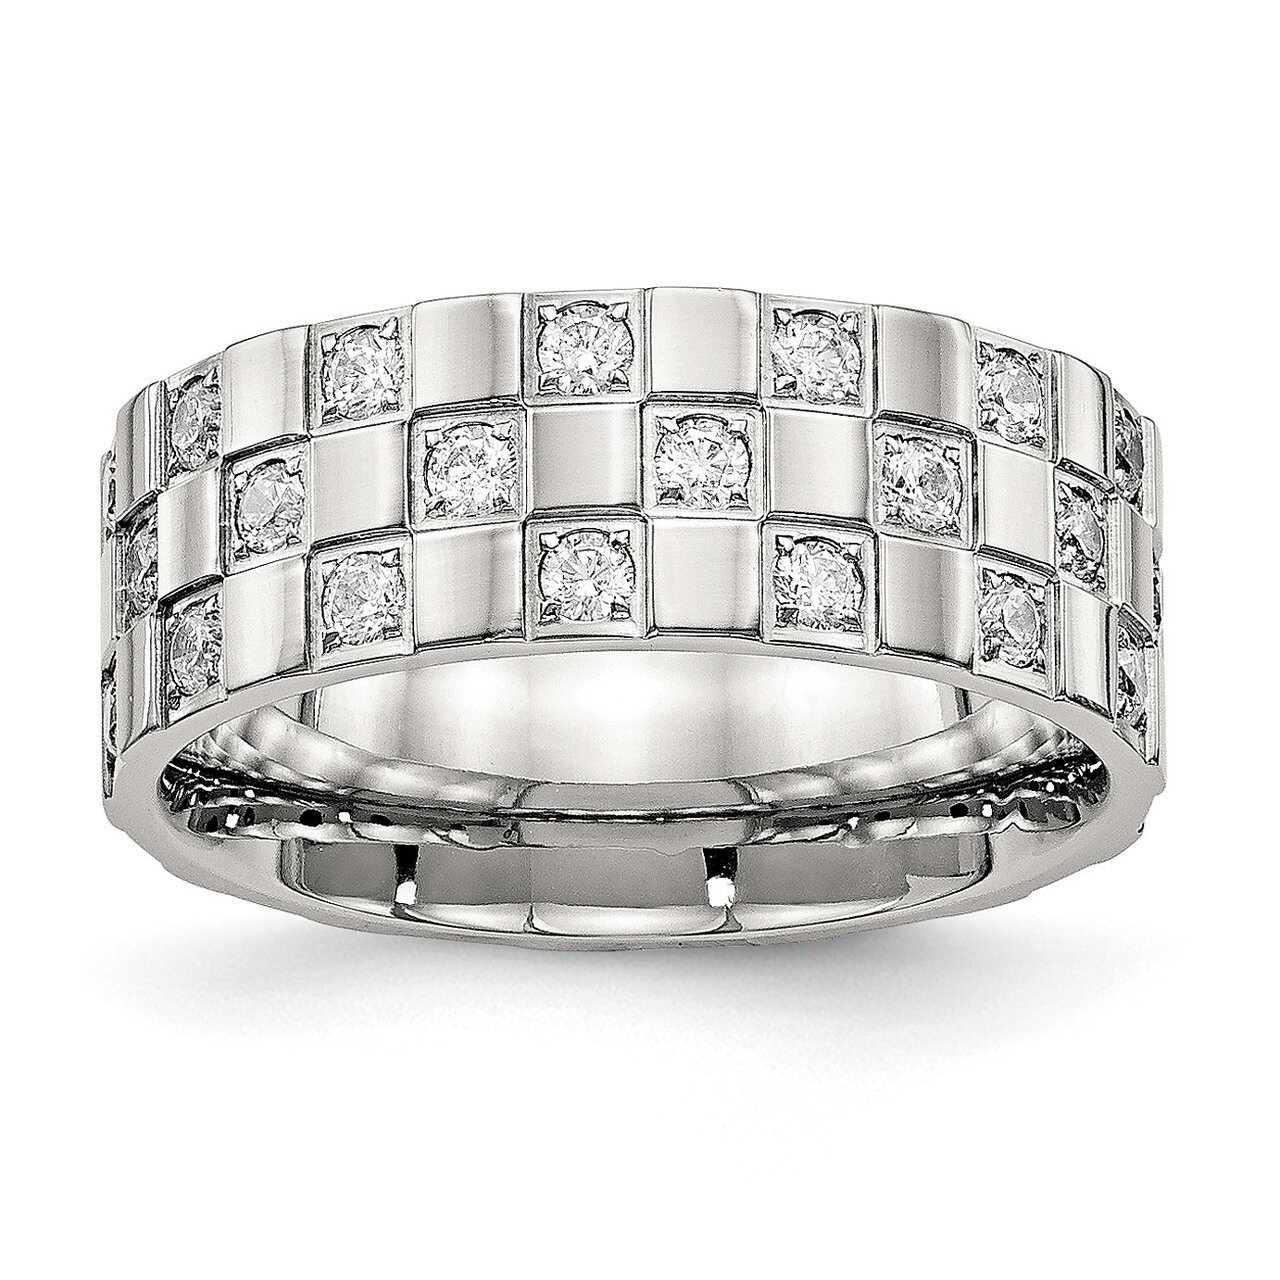 Checkered Board Diamond CZ Ring Stainless Steel Polished SR543